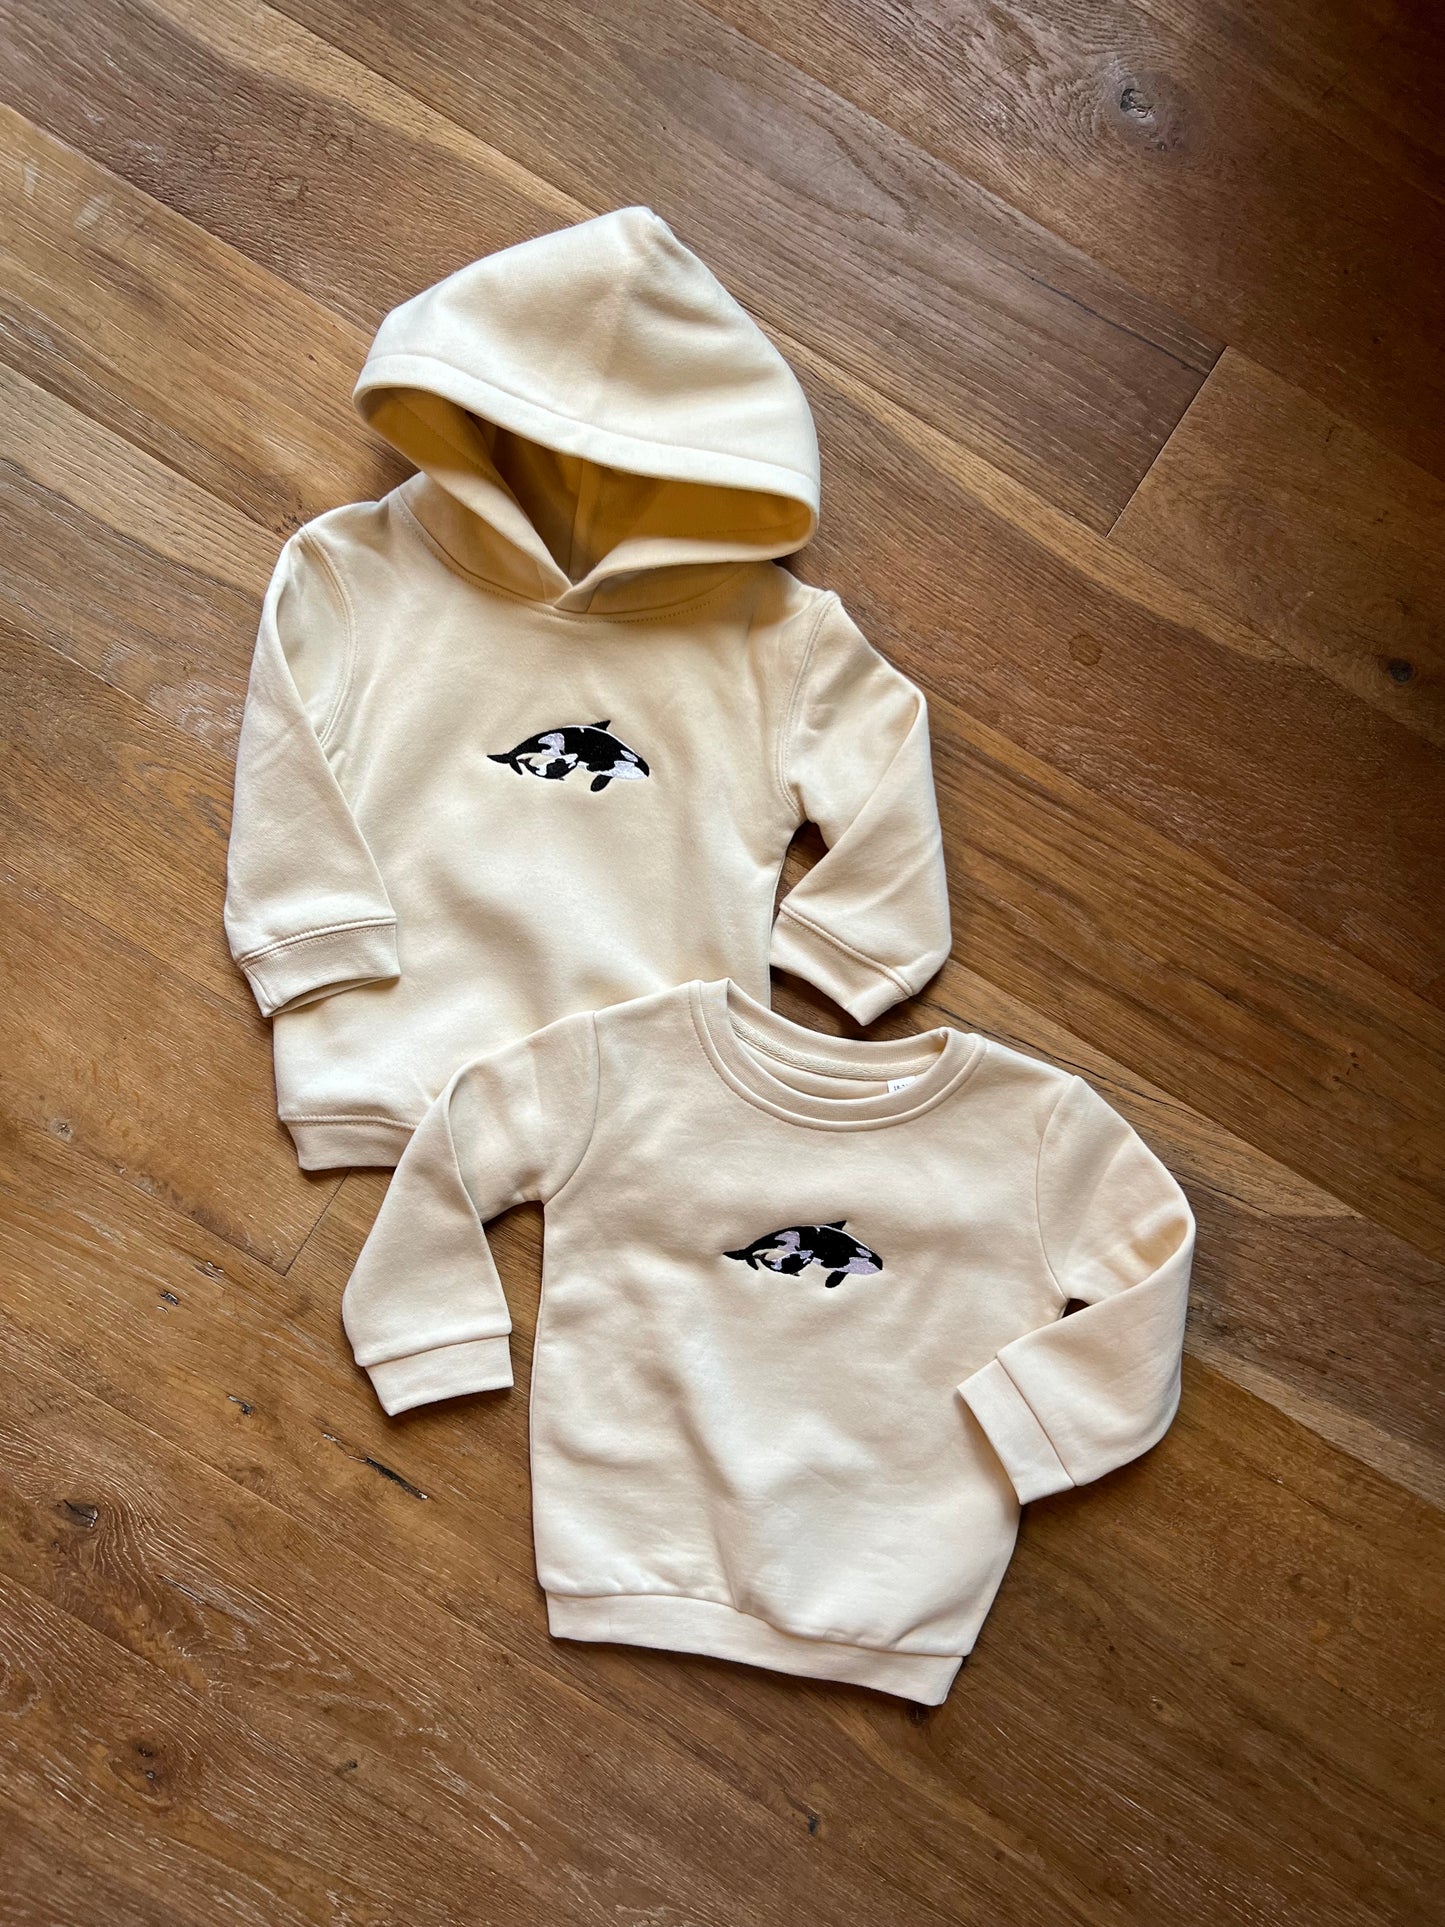 NEW Baby Embroidered Hoodies